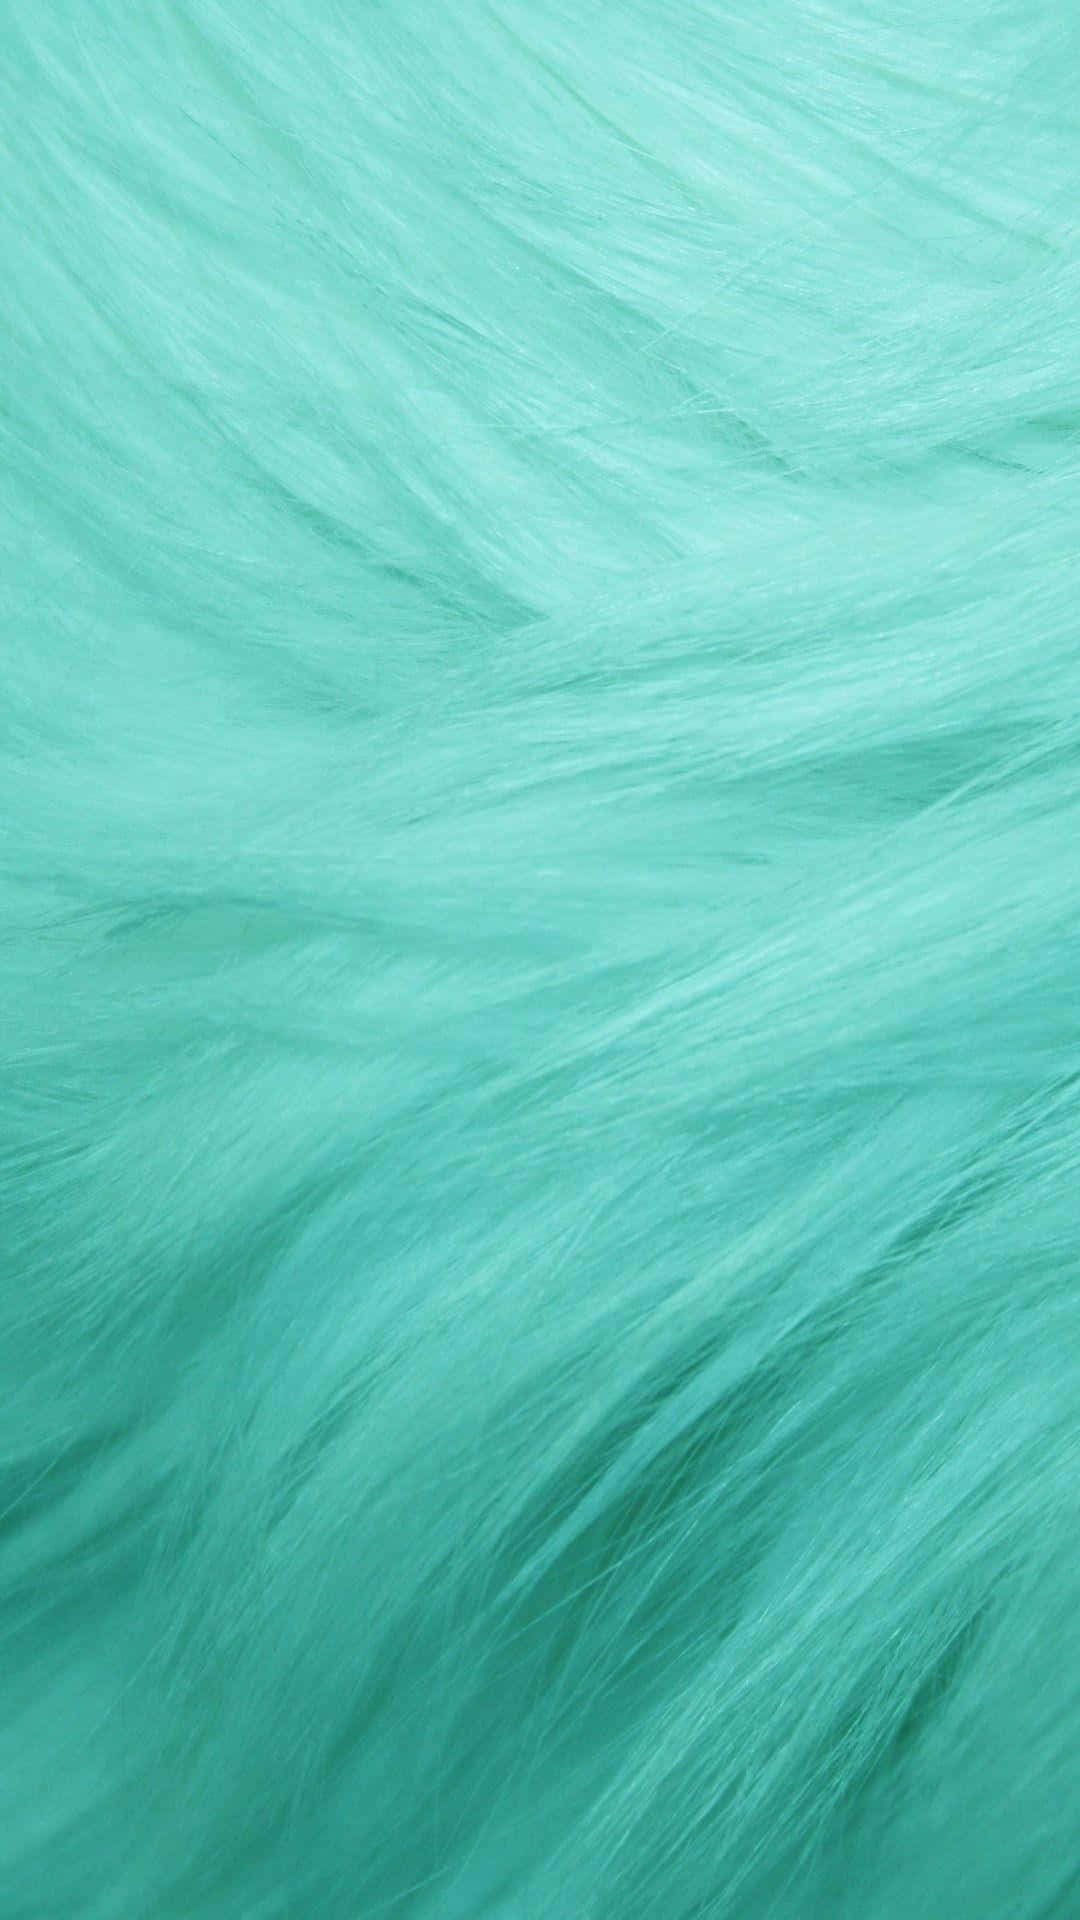 Feel the serenity of turquoise. Wallpaper